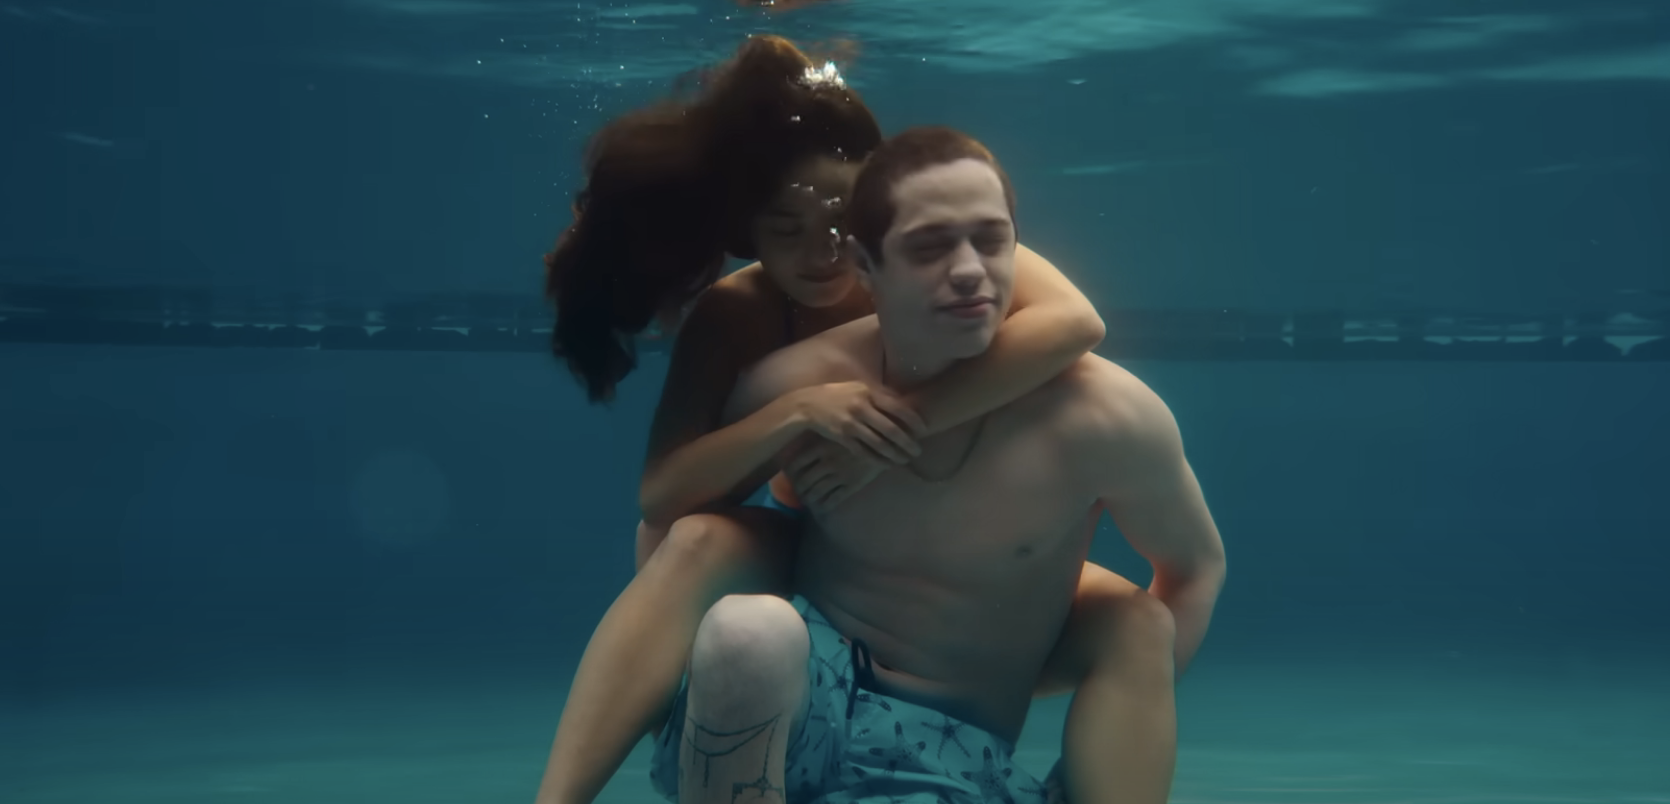 pete holding chase on his back underwater in the film